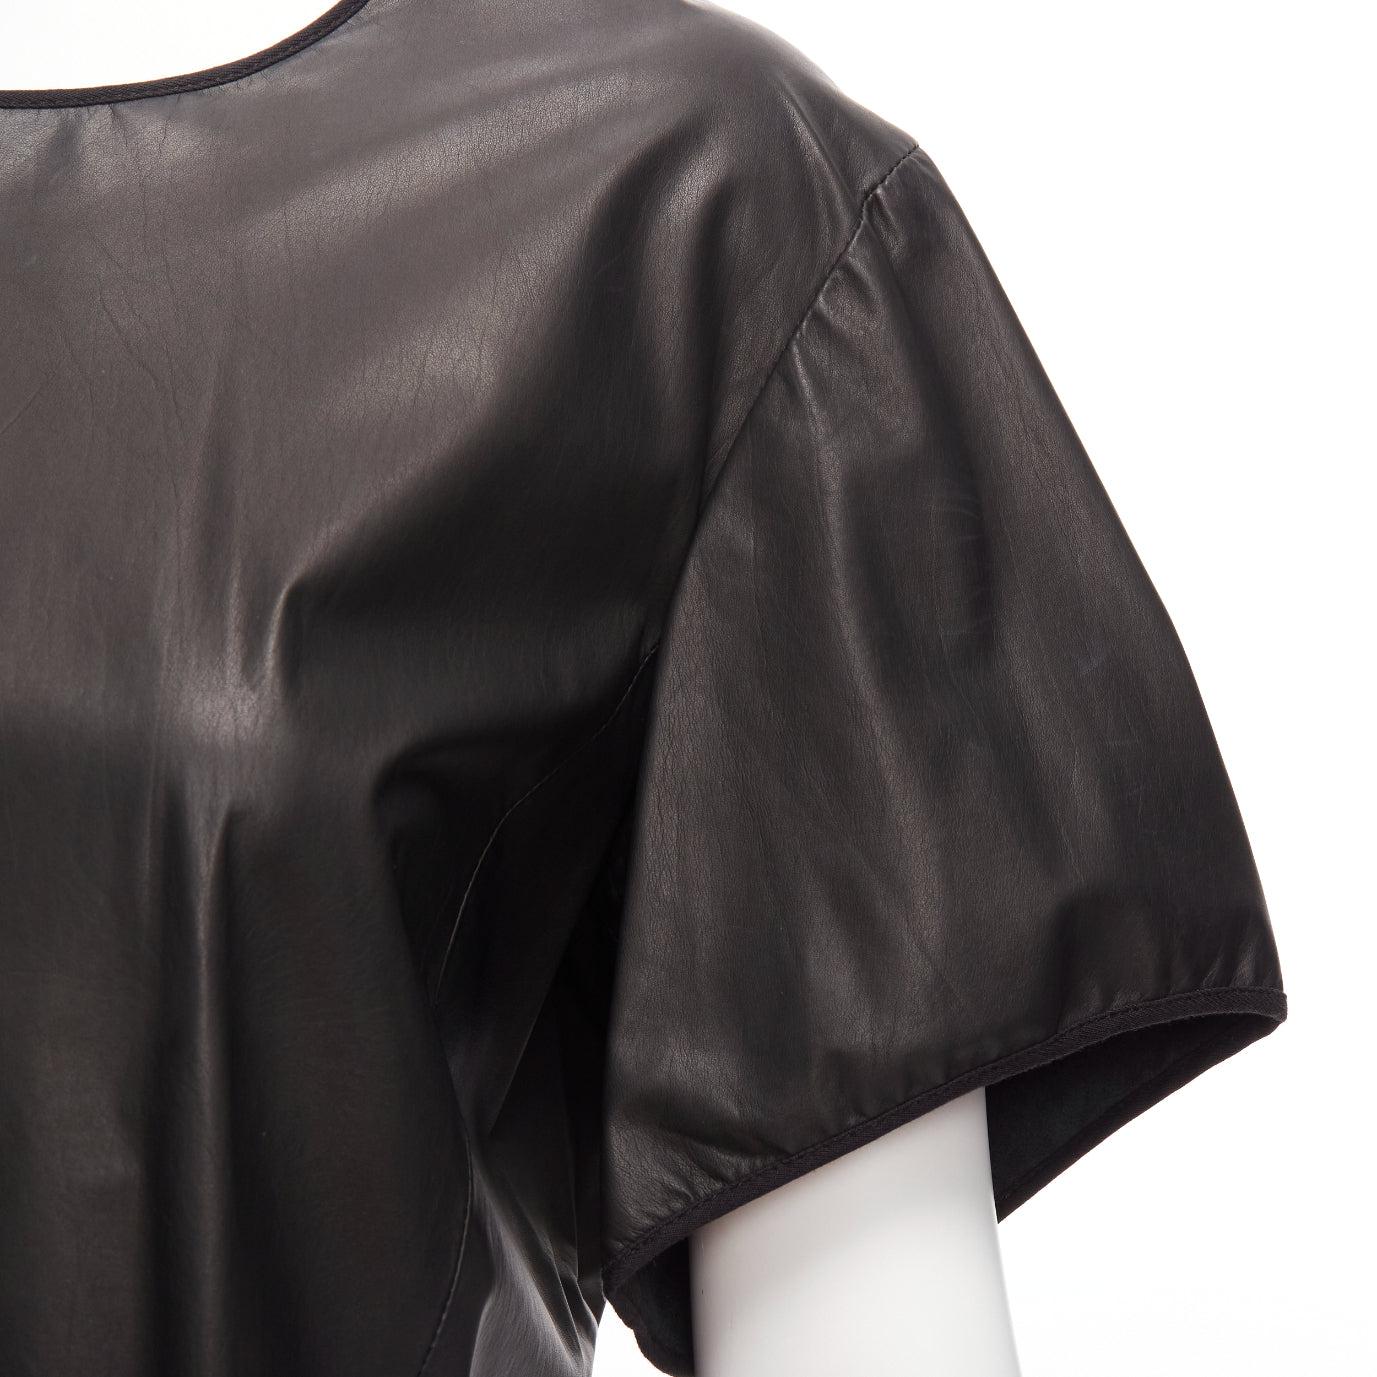 THEYSKENS THEORY black 100% calf leather 3D flare sleeve hi low hem top S
Reference: NILI/A00028
Brand: Theory
Collection: THEYSKENS
Material: Leather
Color: Black
Pattern: Solid
Closure: Pullover
Lining: Black
Extra Details: 3D cut sleeves.
Made